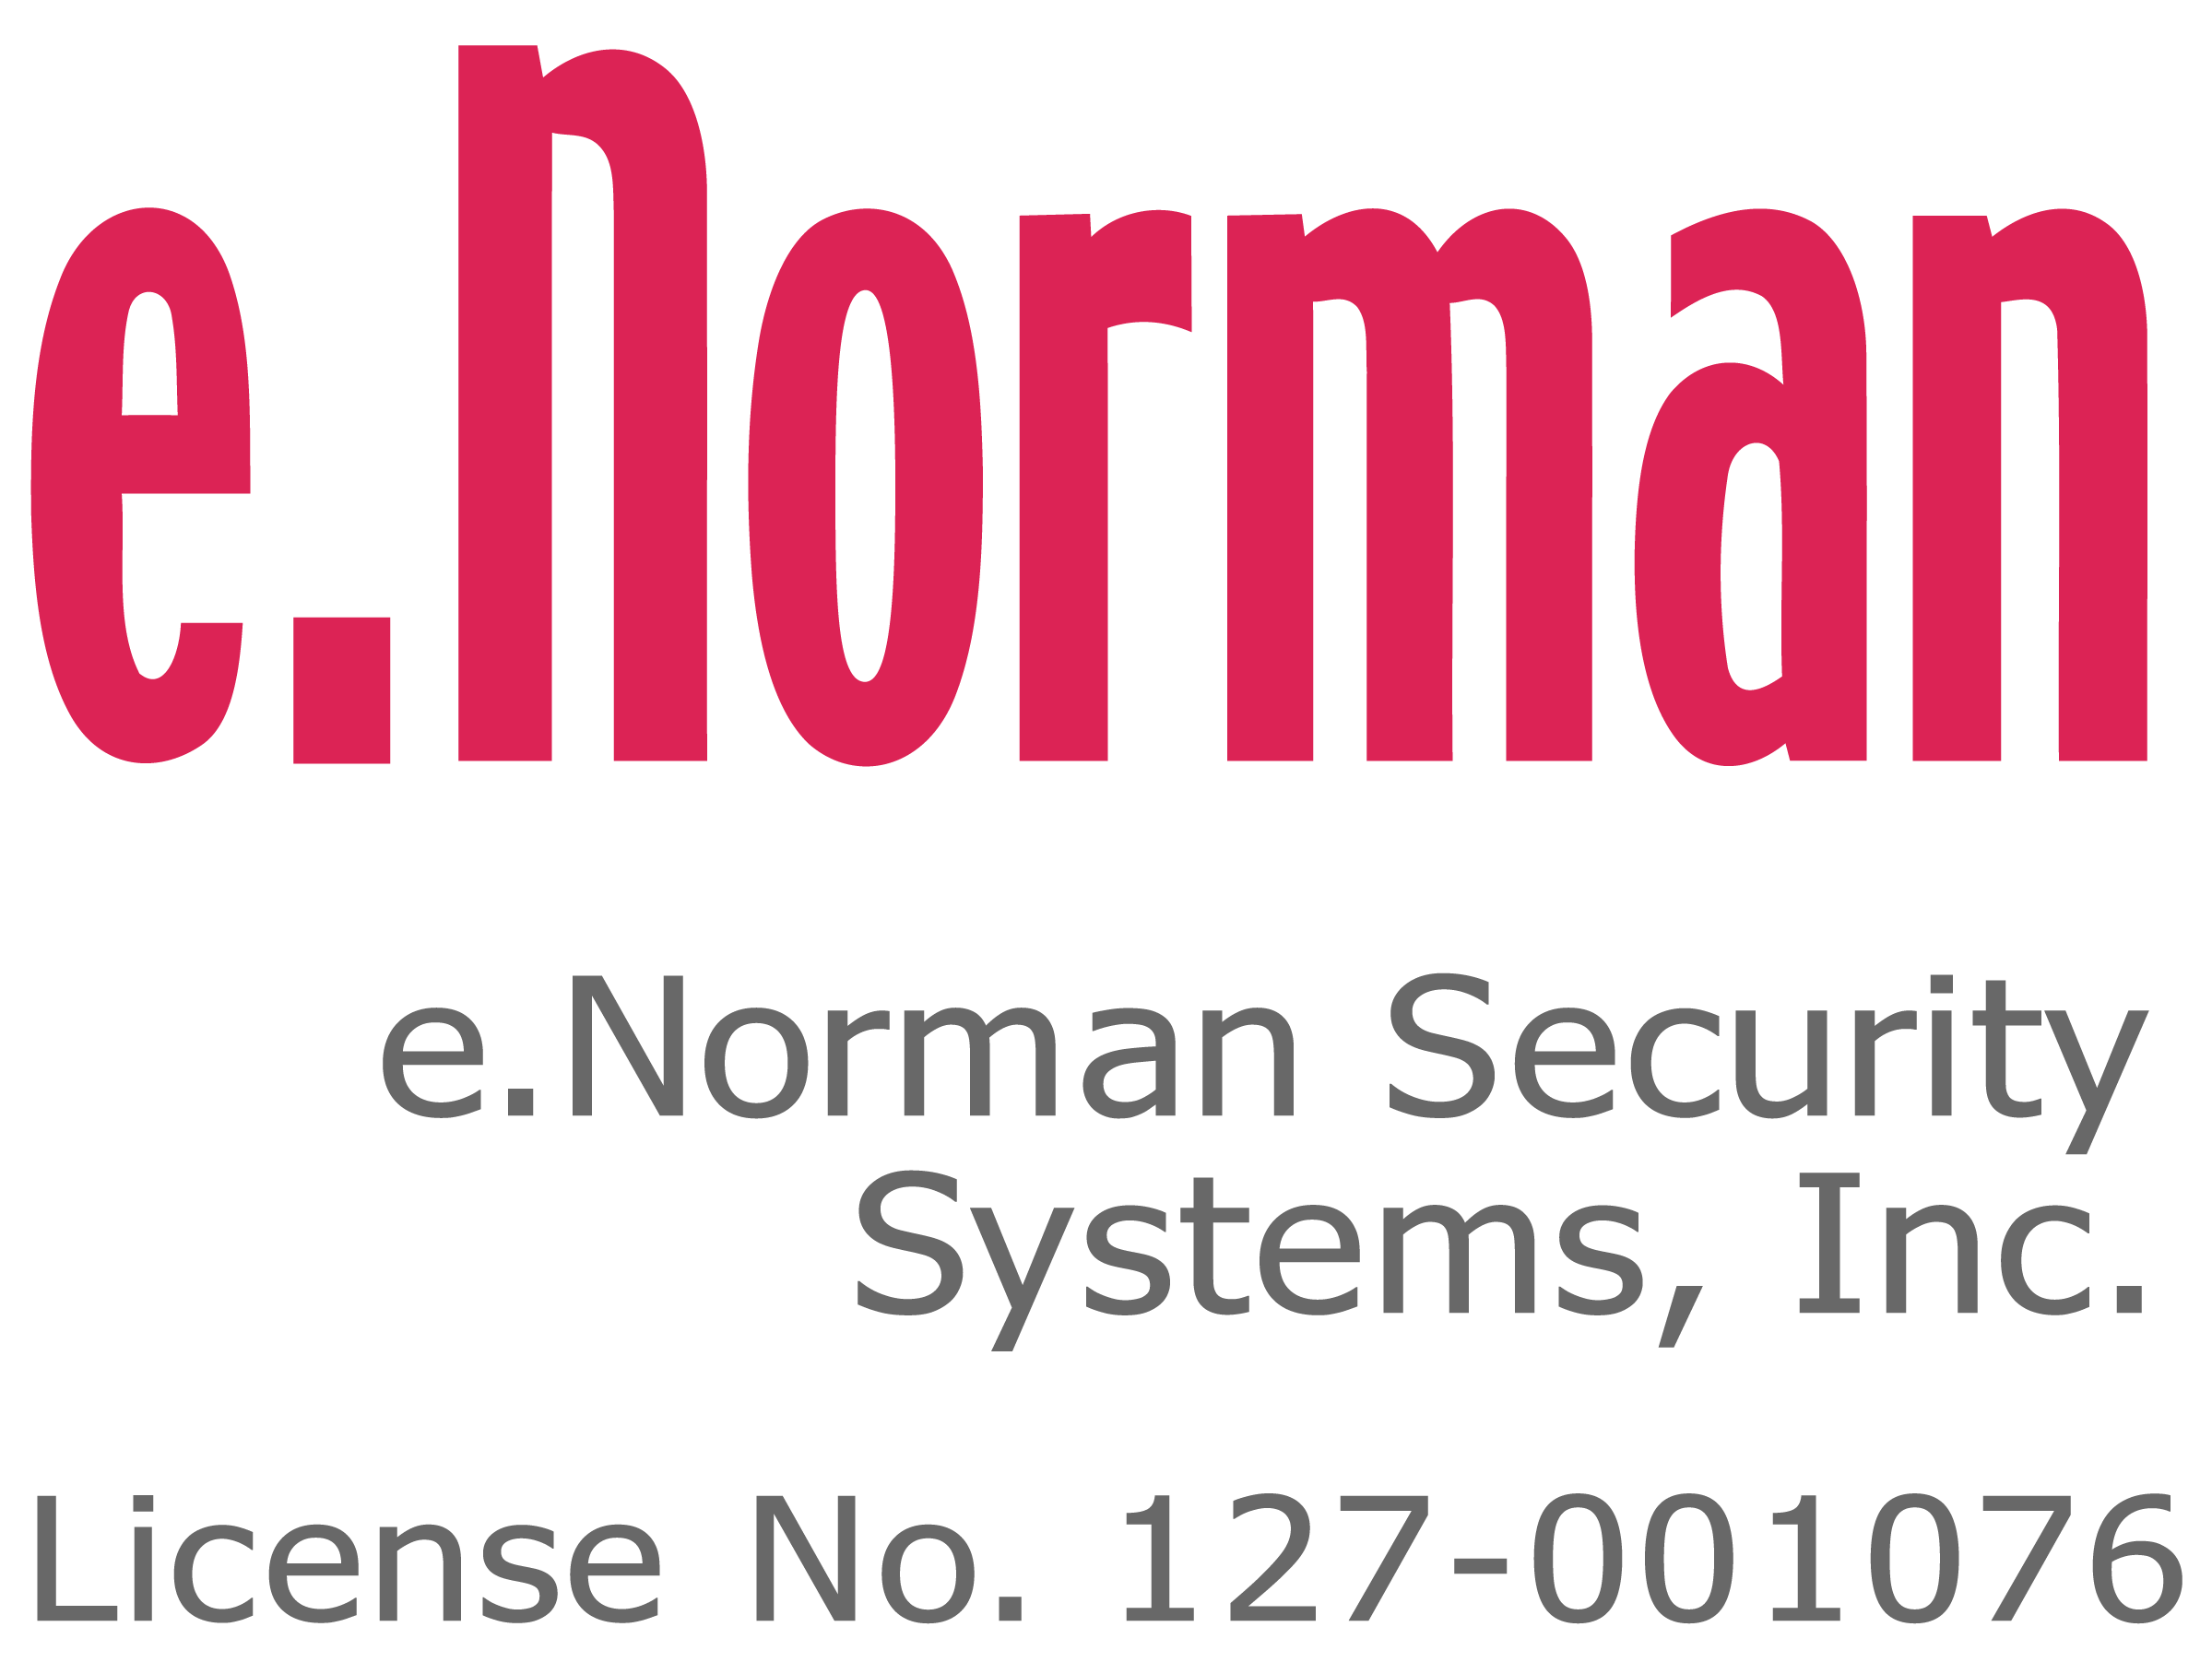 e.Norman Security Systems, Inc.